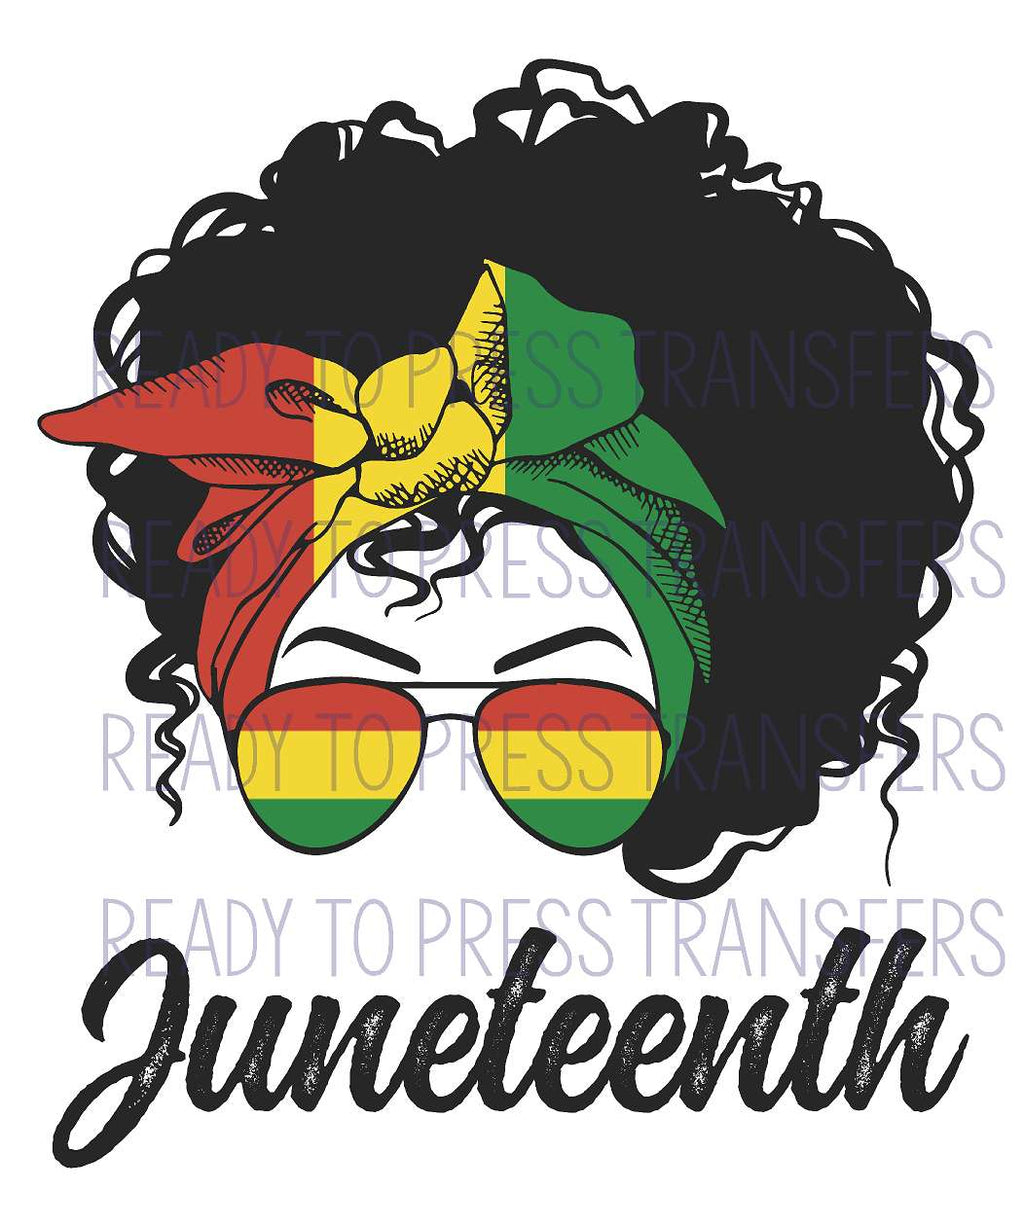 Juneteenth Sublimation Transfer. Ready to press., curly hair aviator glasses